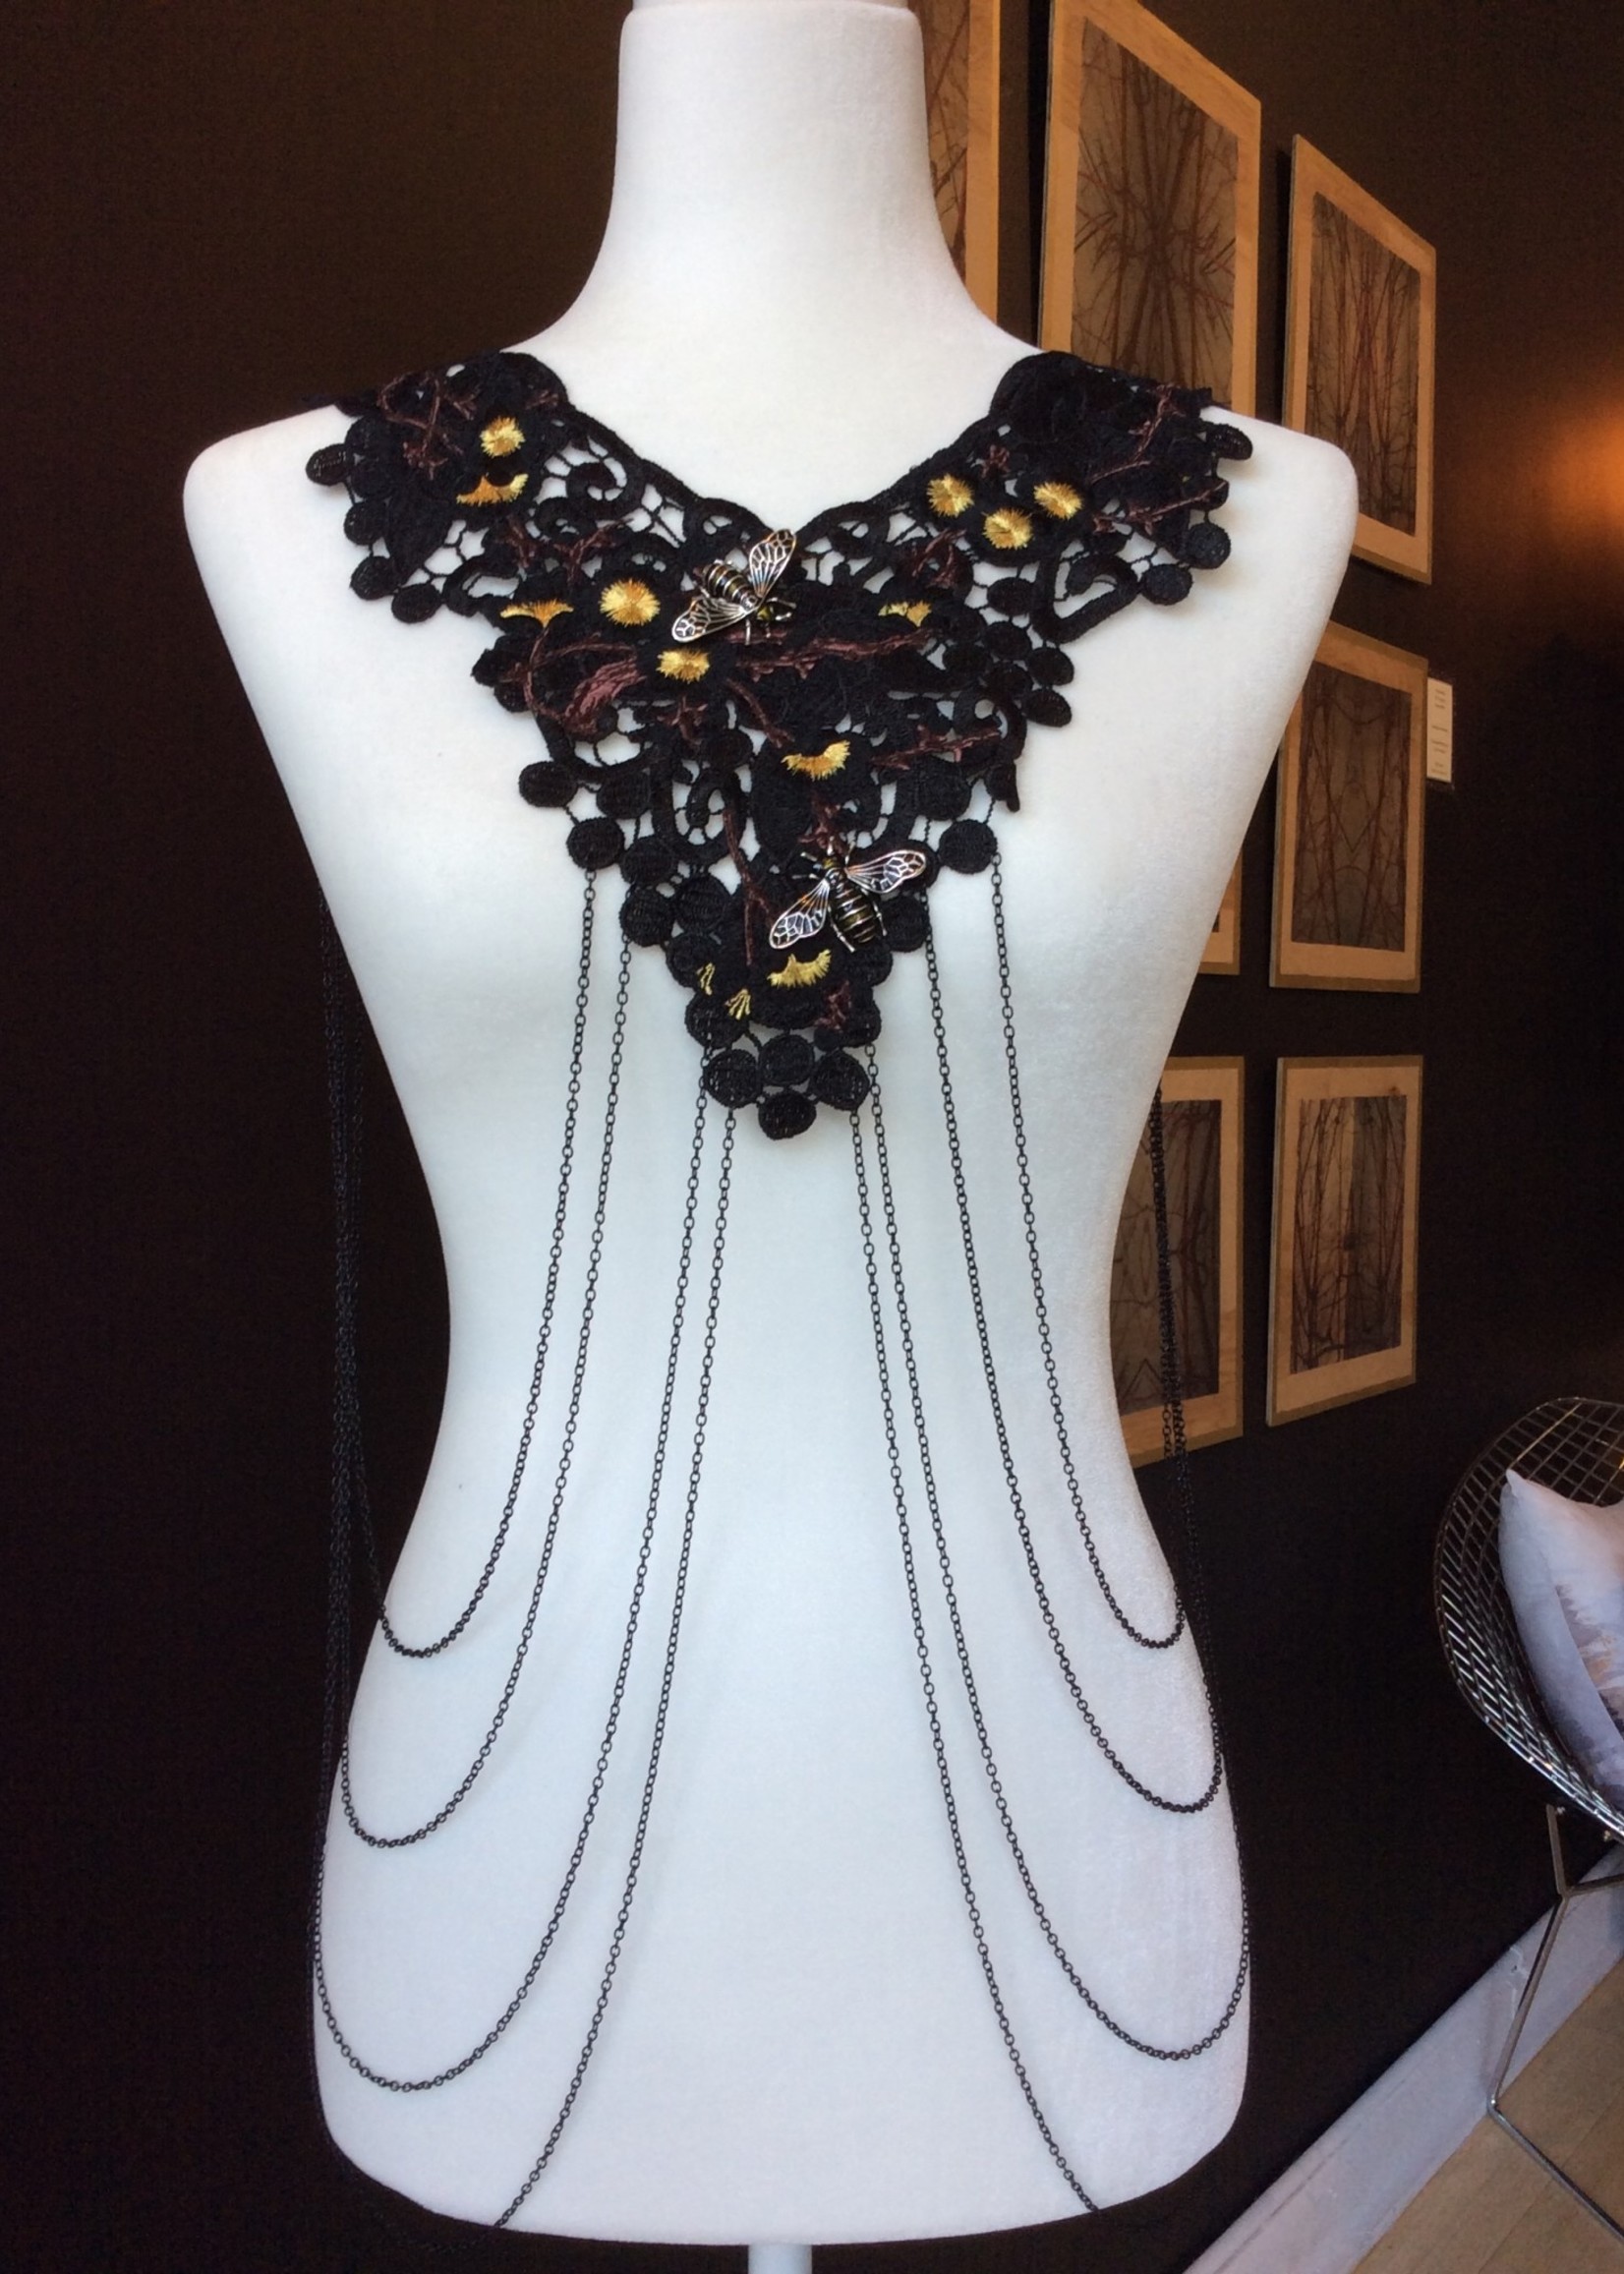 Weapon Of Choice NOLA Yellow Bee Yellow Flower with Branch Accents Black Lace Harness